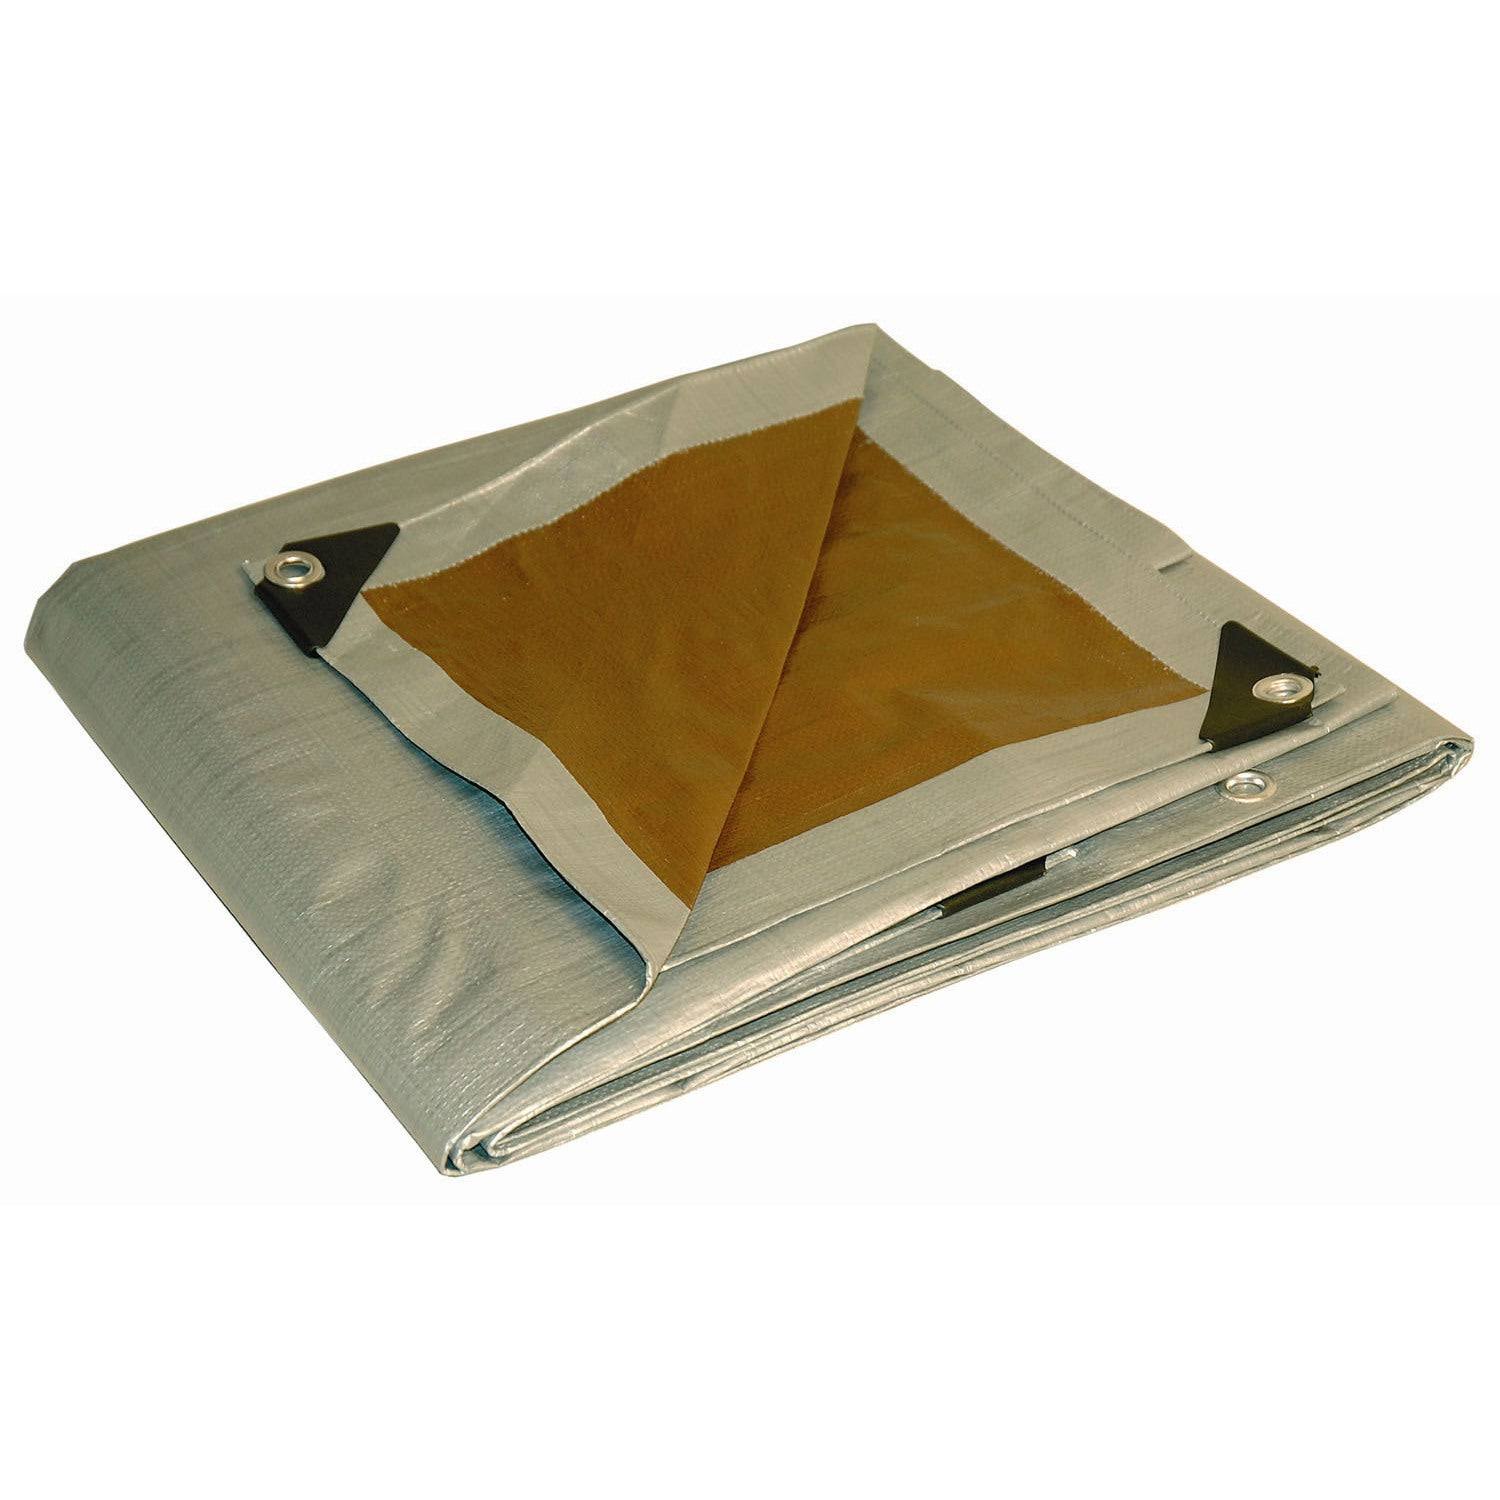 Foremost Tarp - Silver, Brown